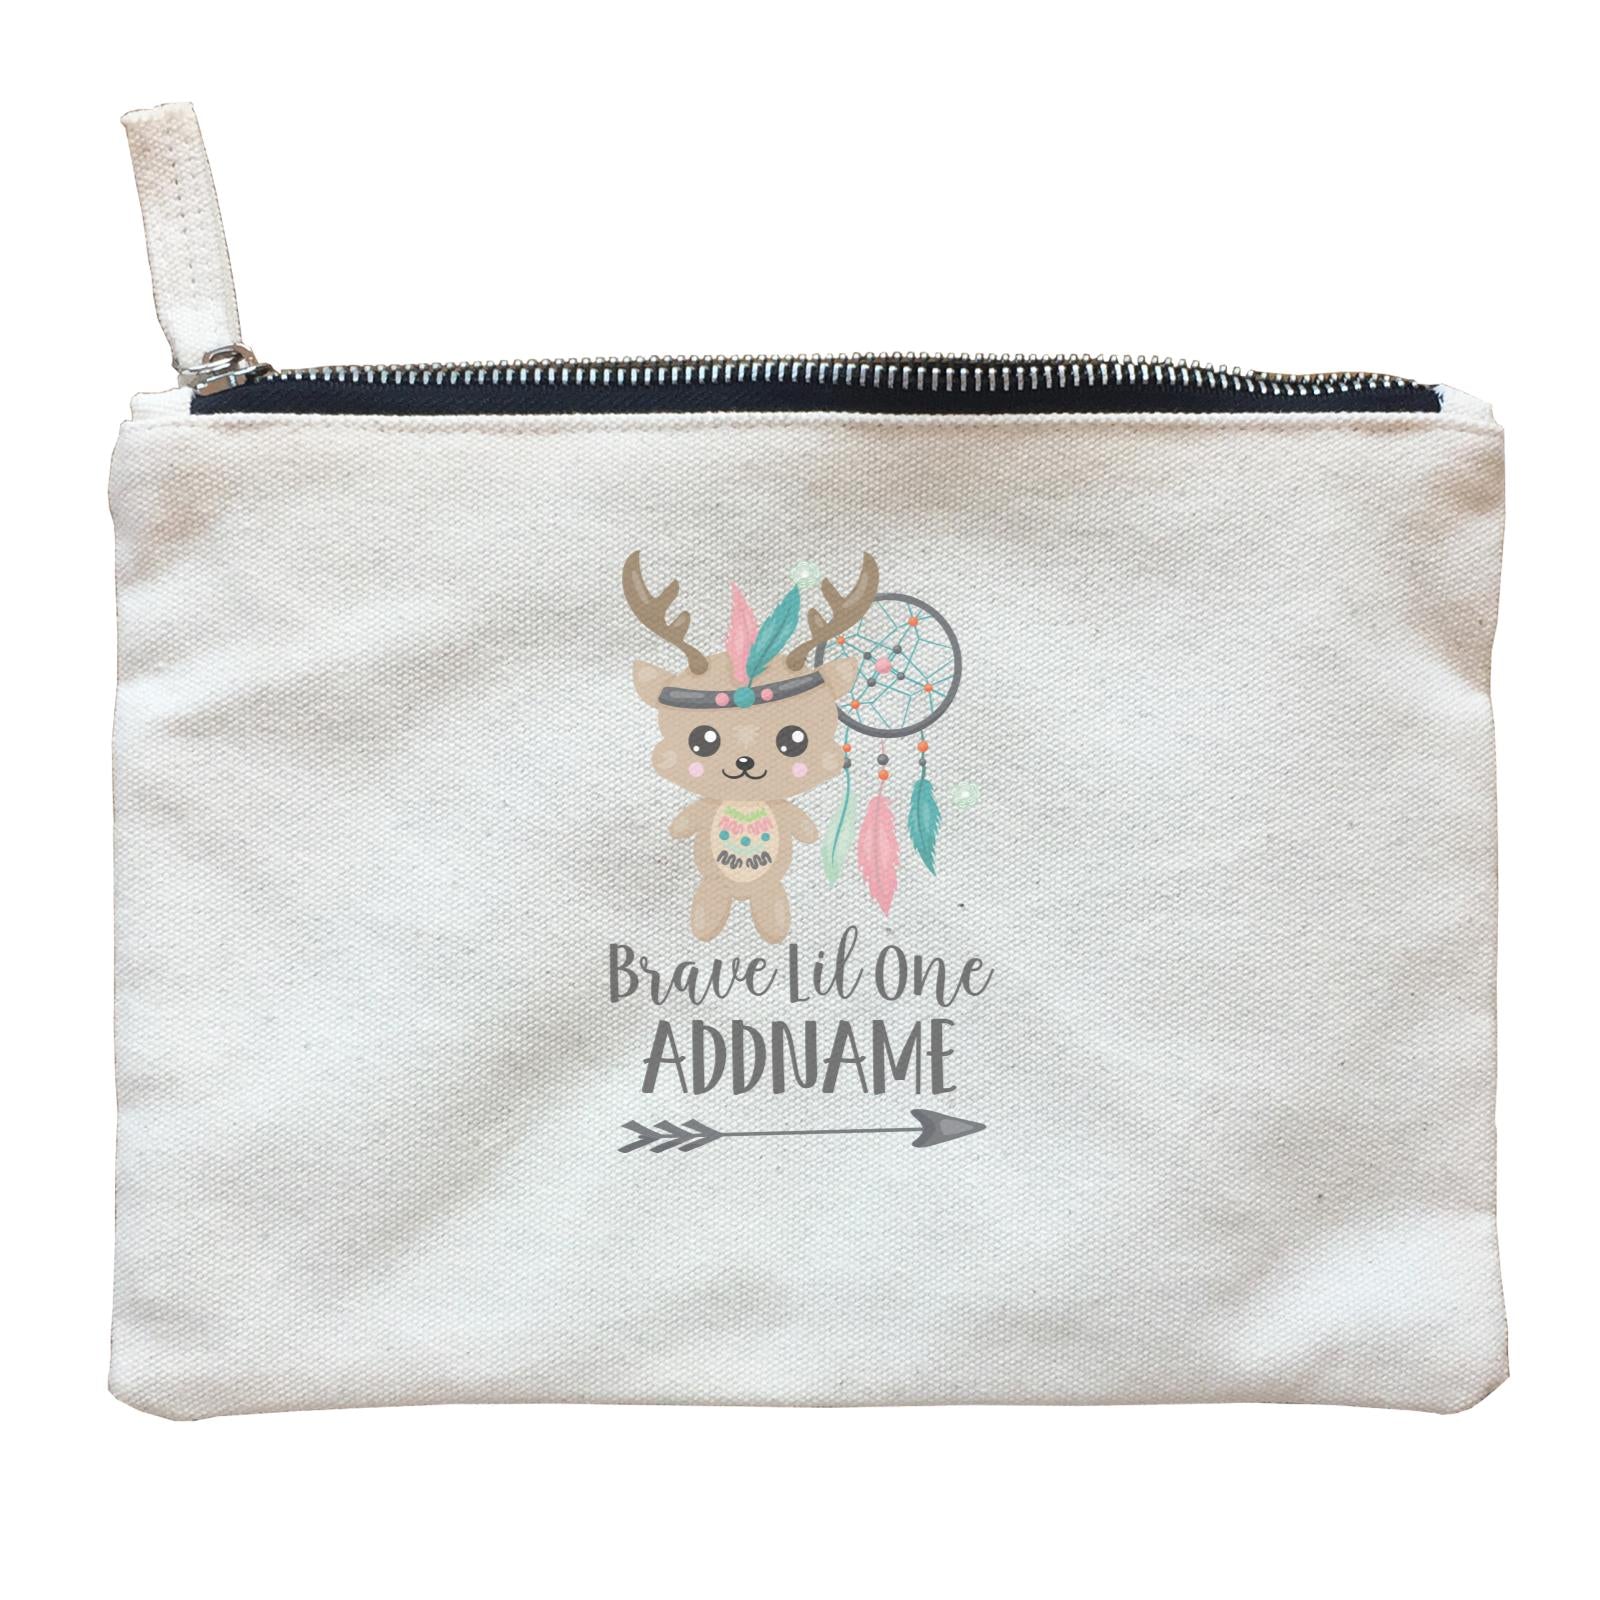 Cute Tribe Animals Deer Brave Lil One Addname Zipper Pouch